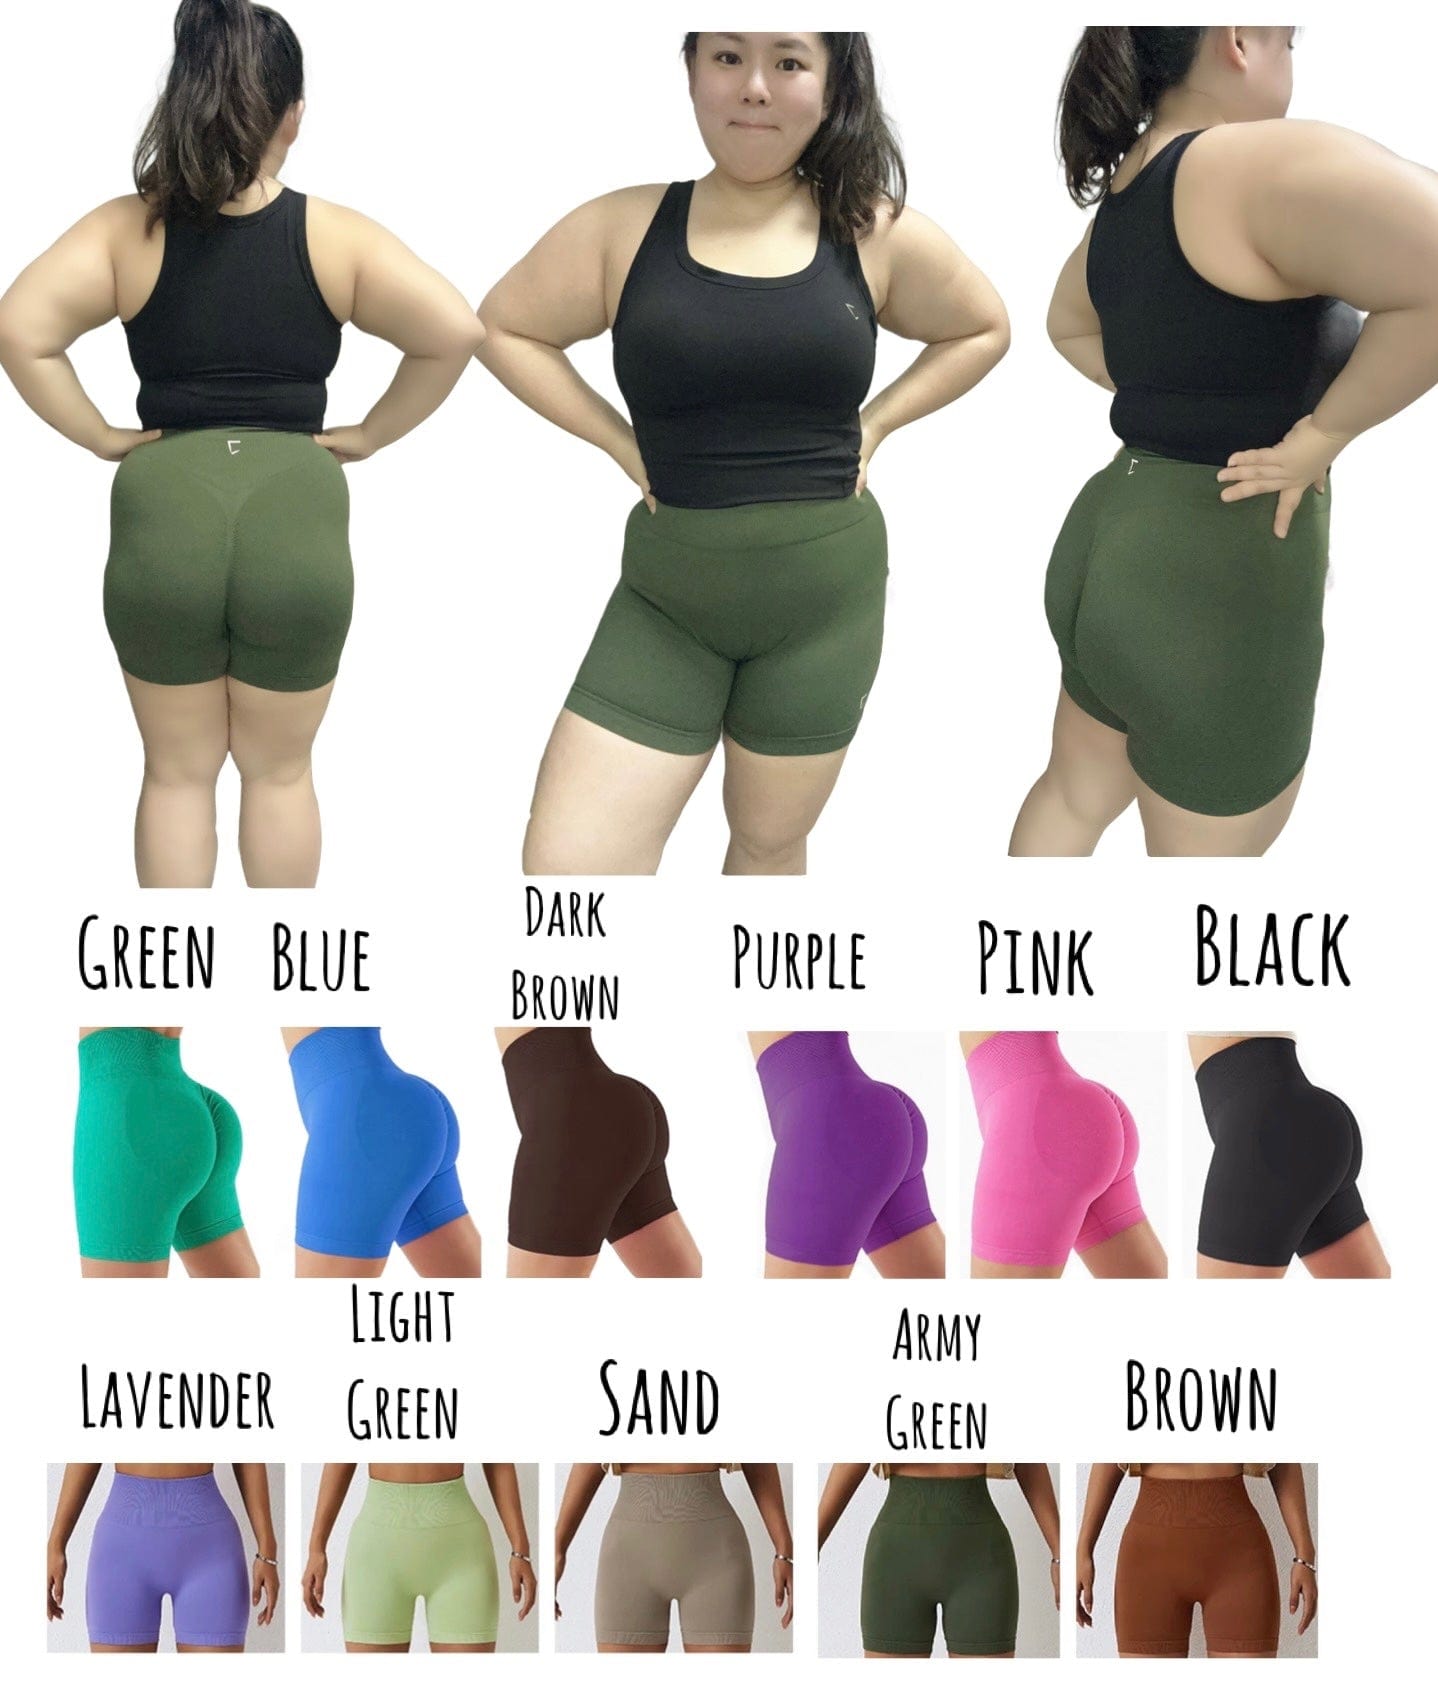 Embrace v6 butt scrunch shorts (stretch similar to v2 but slightly thicker) L size can fit XL - 4 inch inseam